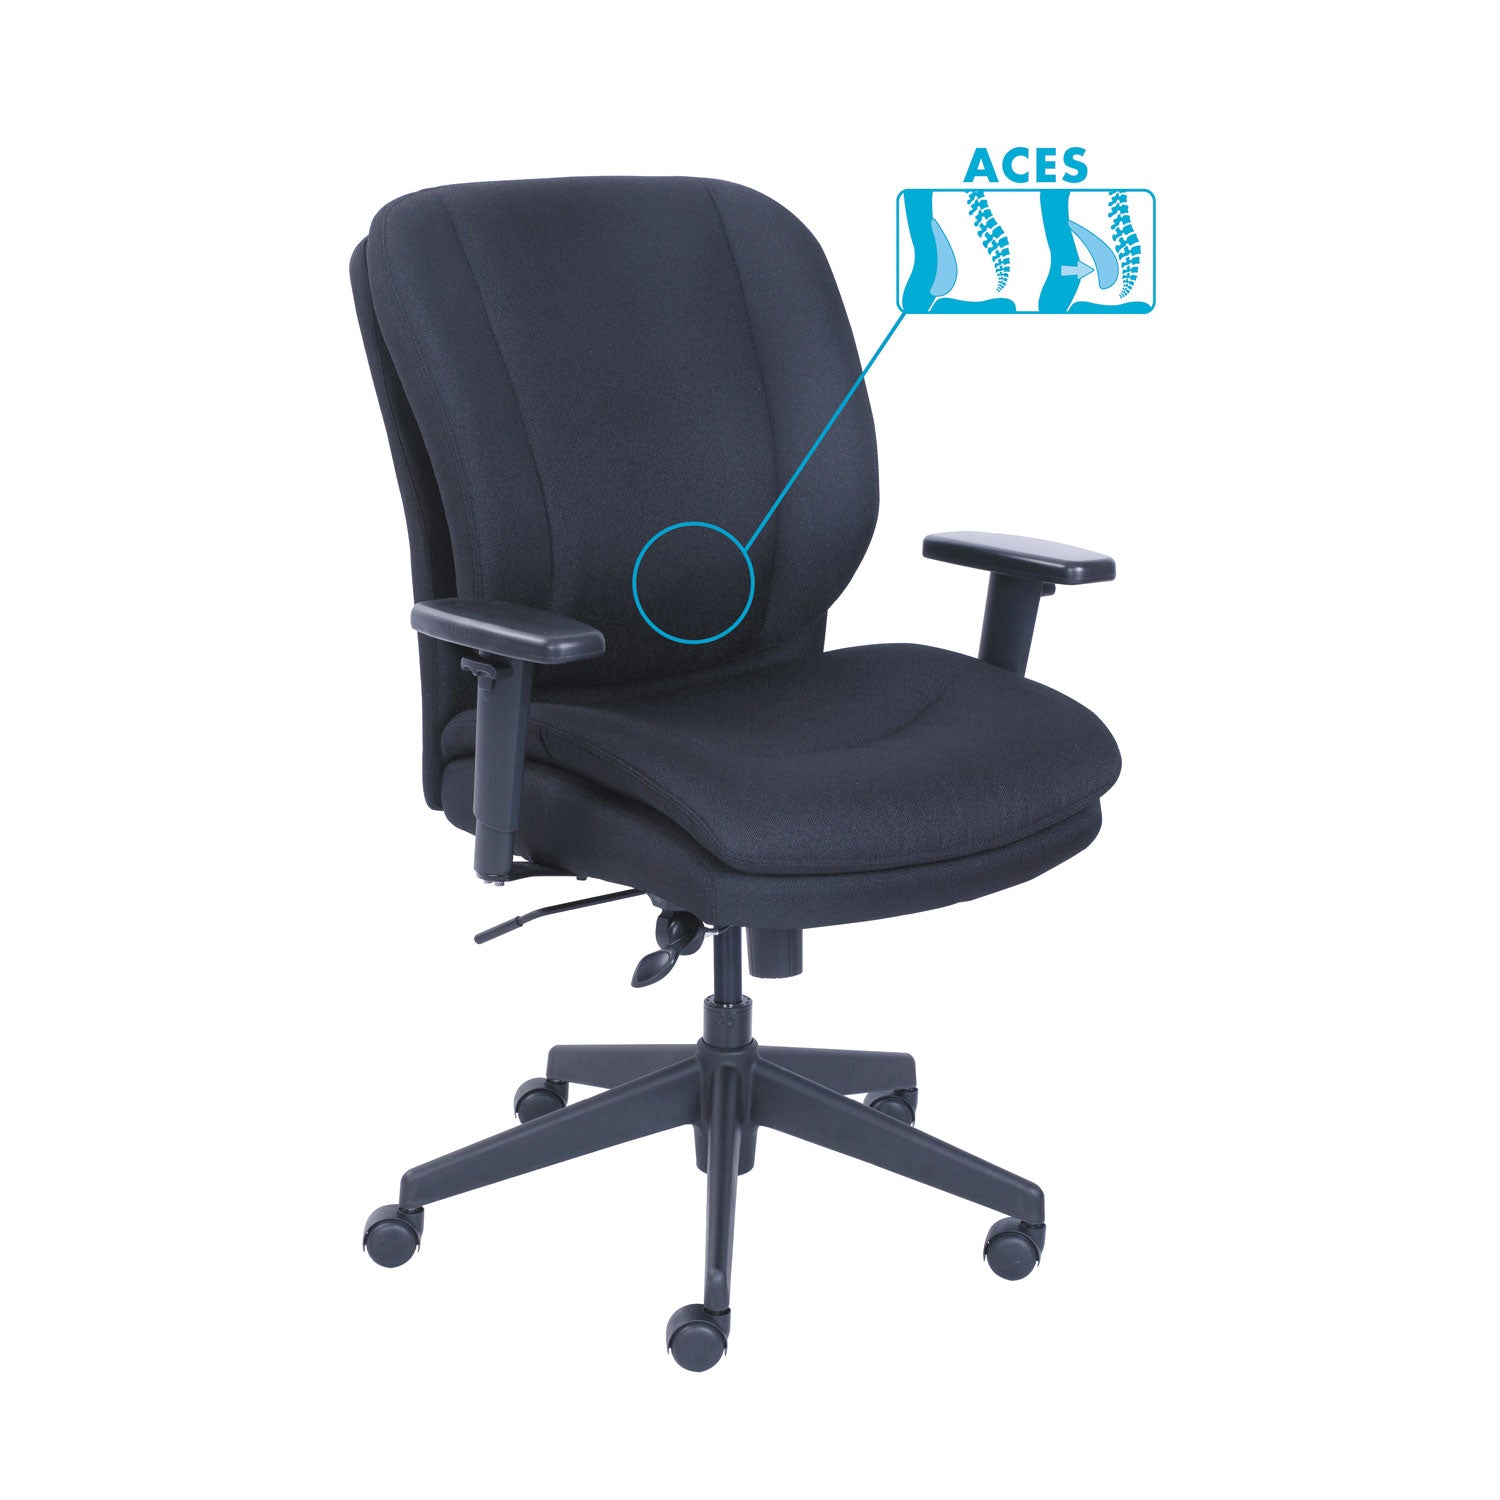 cosset-ergonomic-task-chair-supports-up-to-275-lb-195-to-225-seat-height-black_srj48967a - 1